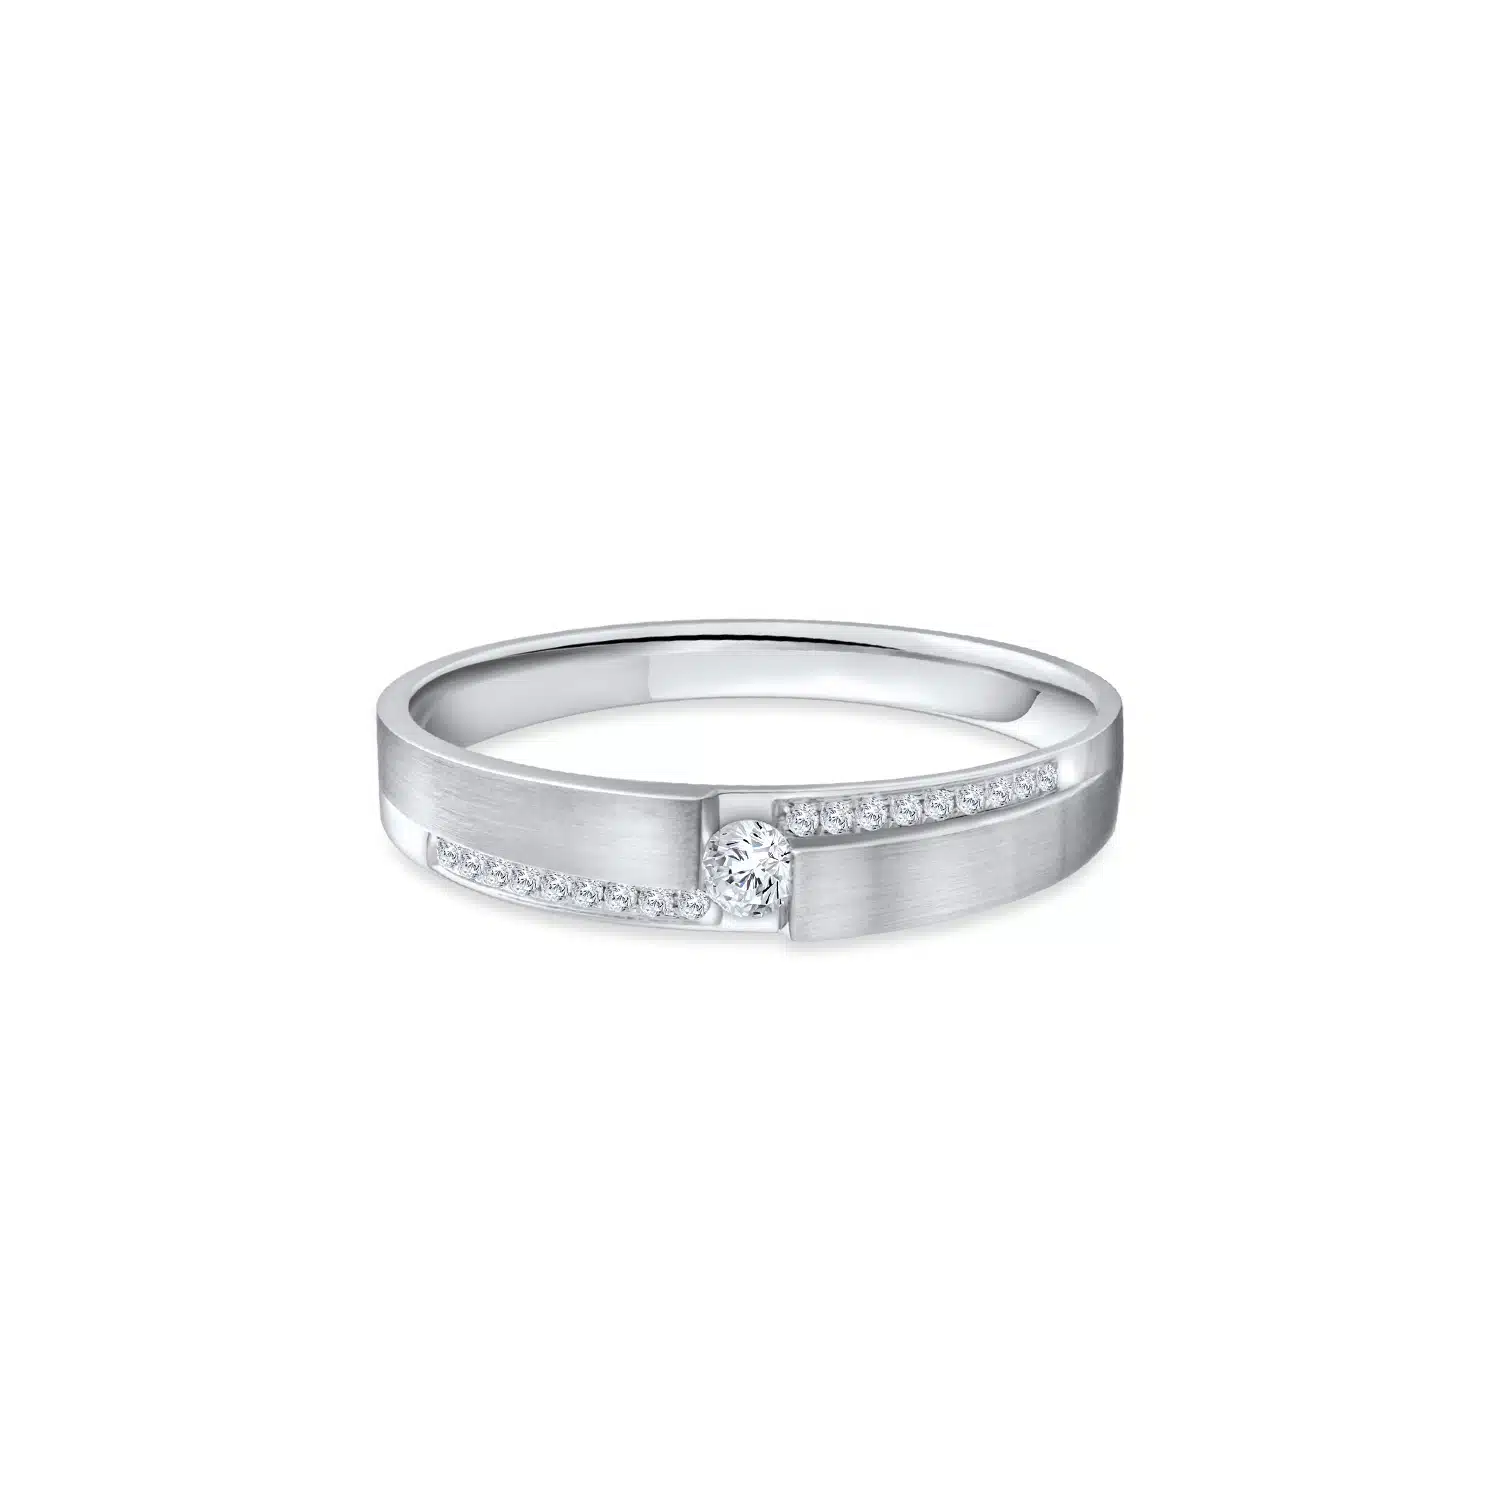 TRUE LOVE LINK to celebrate a lifetime love 18k WHITE GOLD WEDDING BAND